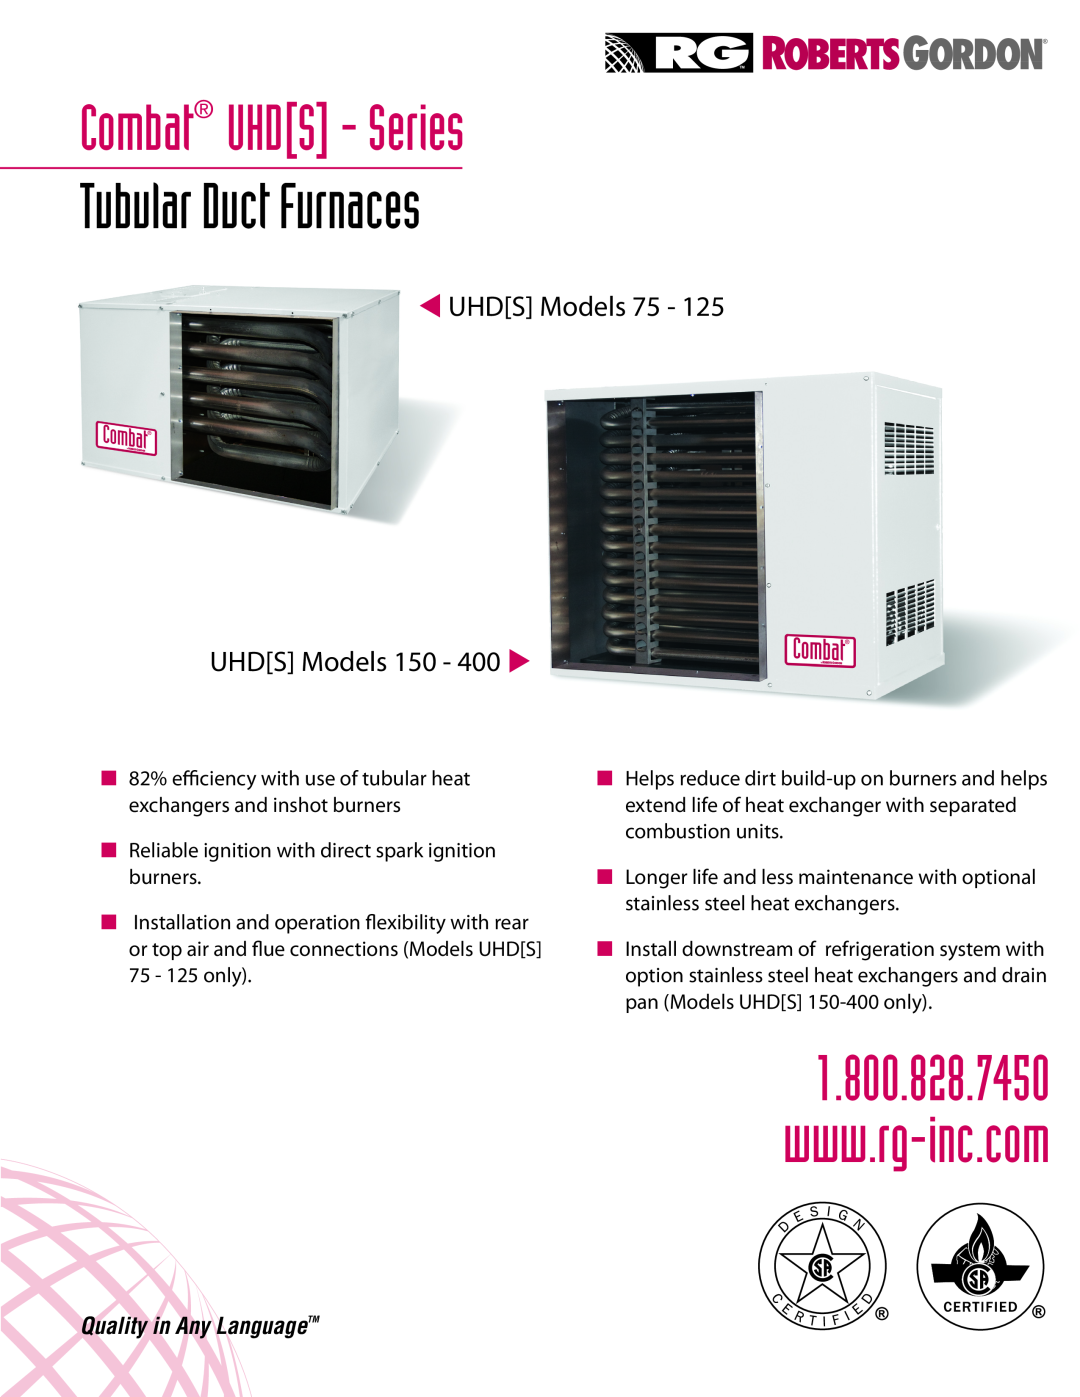 Roberts Gorden UHD[S] 150-400 manual Combat UHDS - Series, Tubular Duct Furnaces, Quality in Any LanguageTM 